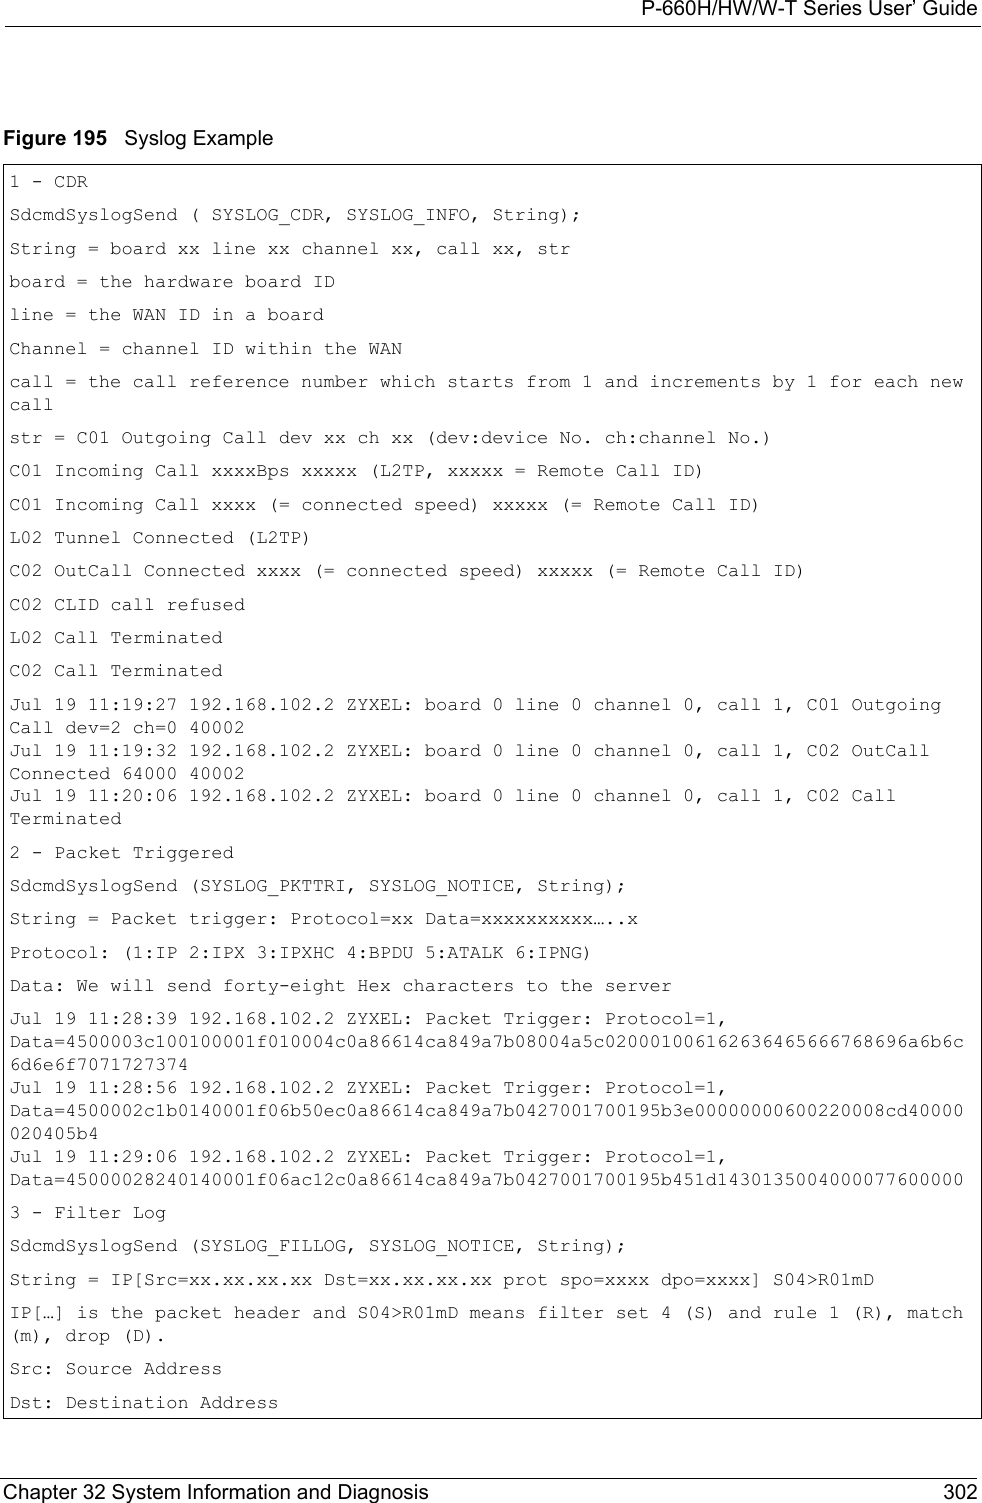 P-660H/HW/W-T Series User’ GuideChapter 32 System Information and Diagnosis 302Figure 195   Syslog Example1 - CDRSdcmdSyslogSend ( SYSLOG_CDR, SYSLOG_INFO, String);String = board xx line xx channel xx, call xx, strboard = the hardware board IDline = the WAN ID in a boardChannel = channel ID within the WANcall = the call reference number which starts from 1 and increments by 1 for each new callstr = C01 Outgoing Call dev xx ch xx (dev:device No. ch:channel No.)C01 Incoming Call xxxxBps xxxxx (L2TP, xxxxx = Remote Call ID)C01 Incoming Call xxxx (= connected speed) xxxxx (= Remote Call ID)L02 Tunnel Connected (L2TP)C02 OutCall Connected xxxx (= connected speed) xxxxx (= Remote Call ID)C02 CLID call refusedL02 Call TerminatedC02 Call TerminatedJul 19 11:19:27 192.168.102.2 ZYXEL: board 0 line 0 channel 0, call 1, C01 Outgoing Call dev=2 ch=0 40002Jul 19 11:19:32 192.168.102.2 ZYXEL: board 0 line 0 channel 0, call 1, C02 OutCall Connected 64000 40002Jul 19 11:20:06 192.168.102.2 ZYXEL: board 0 line 0 channel 0, call 1, C02 Call Terminated2 - Packet TriggeredSdcmdSyslogSend (SYSLOG_PKTTRI, SYSLOG_NOTICE, String);String = Packet trigger: Protocol=xx Data=xxxxxxxxxx…..xProtocol: (1:IP 2:IPX 3:IPXHC 4:BPDU 5:ATALK 6:IPNG)Data: We will send forty-eight Hex characters to the serverJul 19 11:28:39 192.168.102.2 ZYXEL: Packet Trigger: Protocol=1, Data=4500003c100100001f010004c0a86614ca849a7b08004a5c020001006162636465666768696a6b6c6d6e6f7071727374Jul 19 11:28:56 192.168.102.2 ZYXEL: Packet Trigger: Protocol=1, Data=4500002c1b0140001f06b50ec0a86614ca849a7b0427001700195b3e00000000600220008cd40000020405b4Jul 19 11:29:06 192.168.102.2 ZYXEL: Packet Trigger: Protocol=1, Data=45000028240140001f06ac12c0a86614ca849a7b0427001700195b451d14301350040000776000003 - Filter LogSdcmdSyslogSend (SYSLOG_FILLOG, SYSLOG_NOTICE, String);String = IP[Src=xx.xx.xx.xx Dst=xx.xx.xx.xx prot spo=xxxx dpo=xxxx] S04&gt;R01mDIP[…] is the packet header and S04&gt;R01mD means filter set 4 (S) and rule 1 (R), match (m), drop (D).Src: Source AddressDst: Destination Address